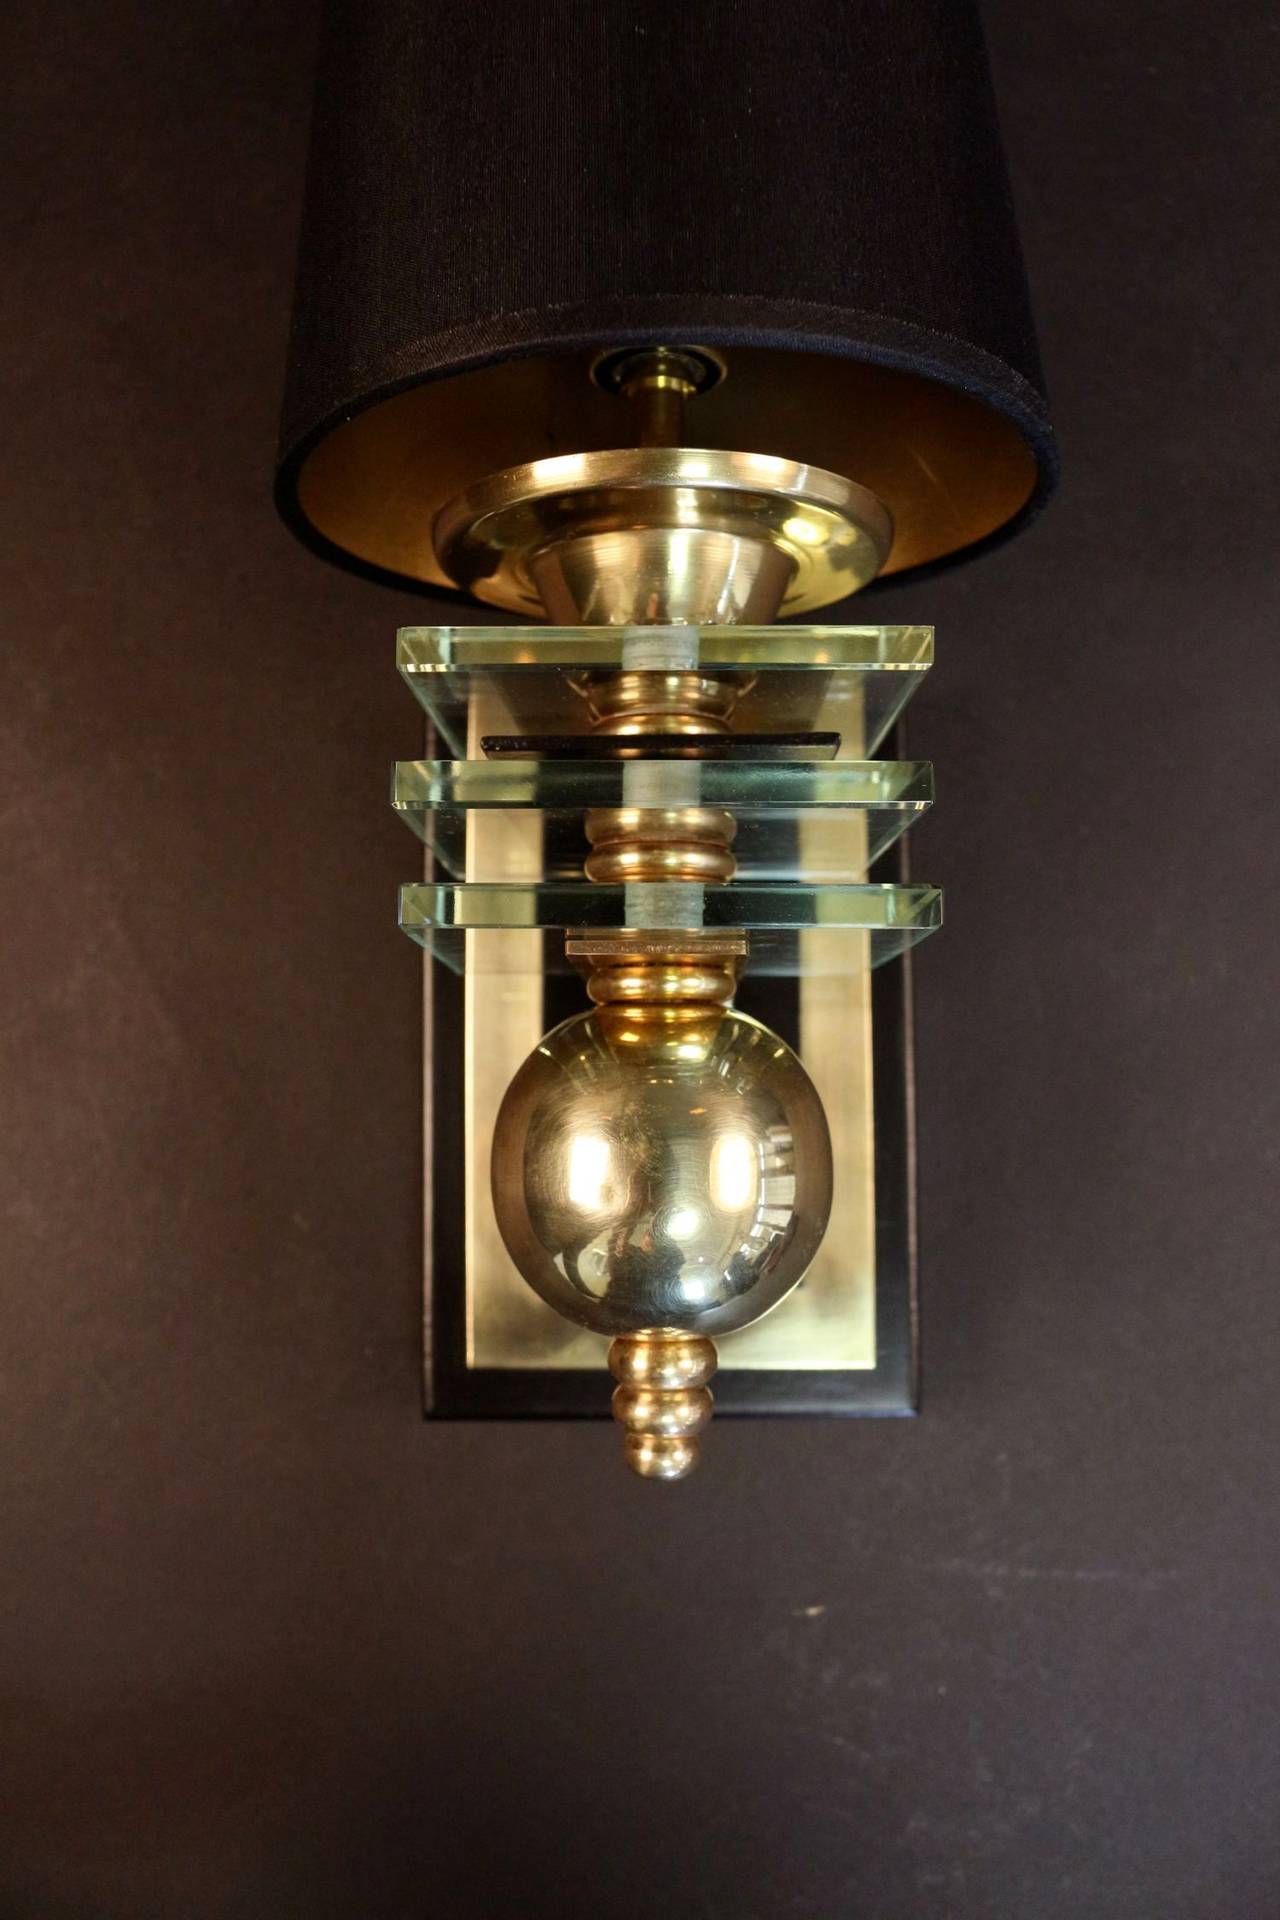 Pair of 1940s sconces by Maison Petitot in gilded and blackened brass. The trunk base is made of three glass plates decorated with inlined brass balls. New black custom lamp shade.